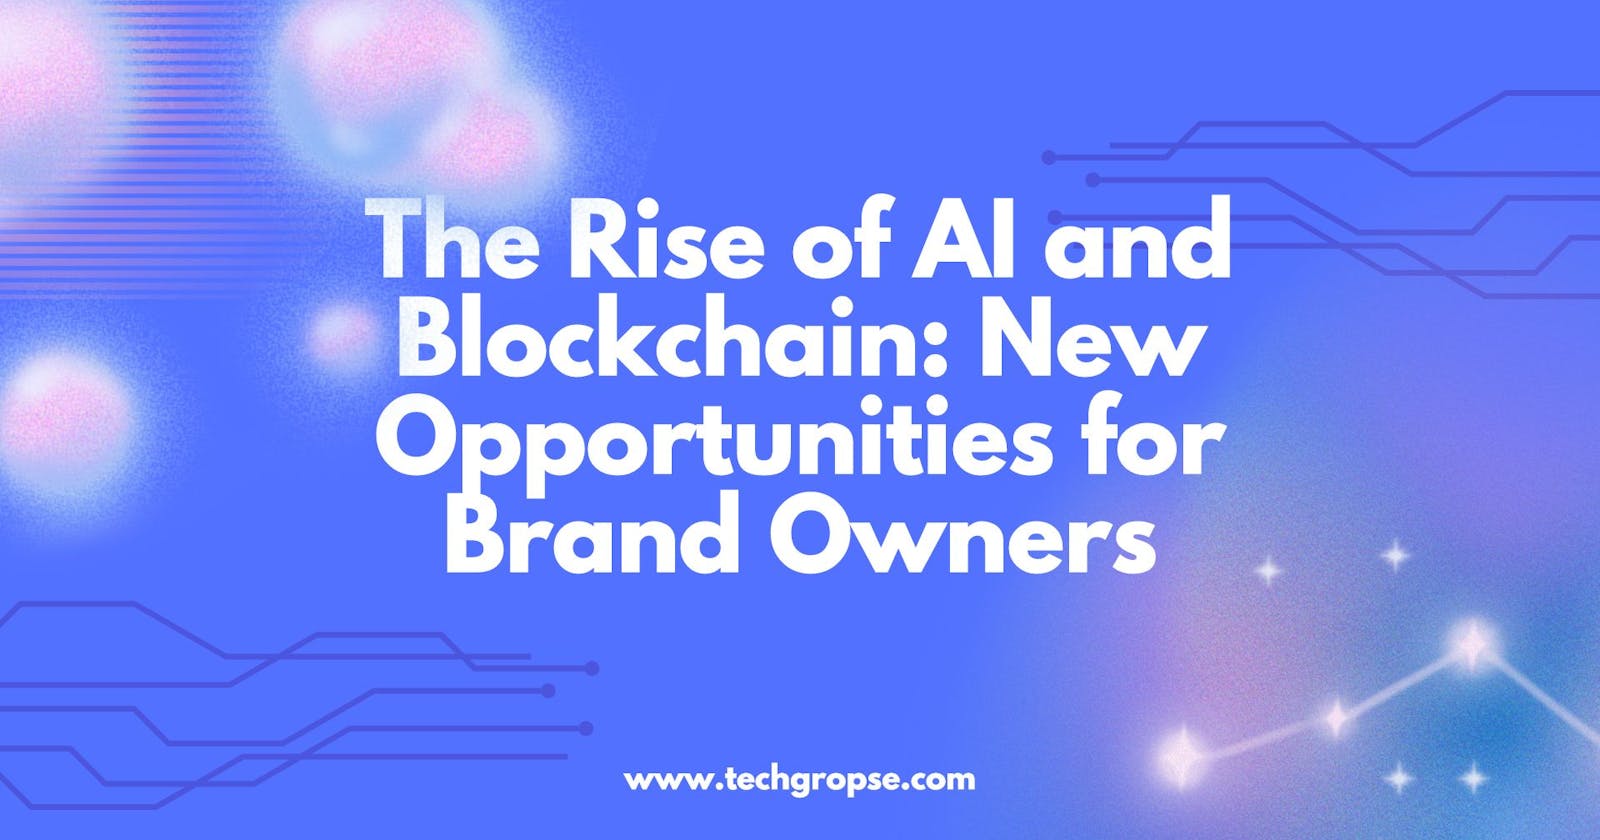 The Rise of AI and Blockchain: New Opportunities for Brand Owners